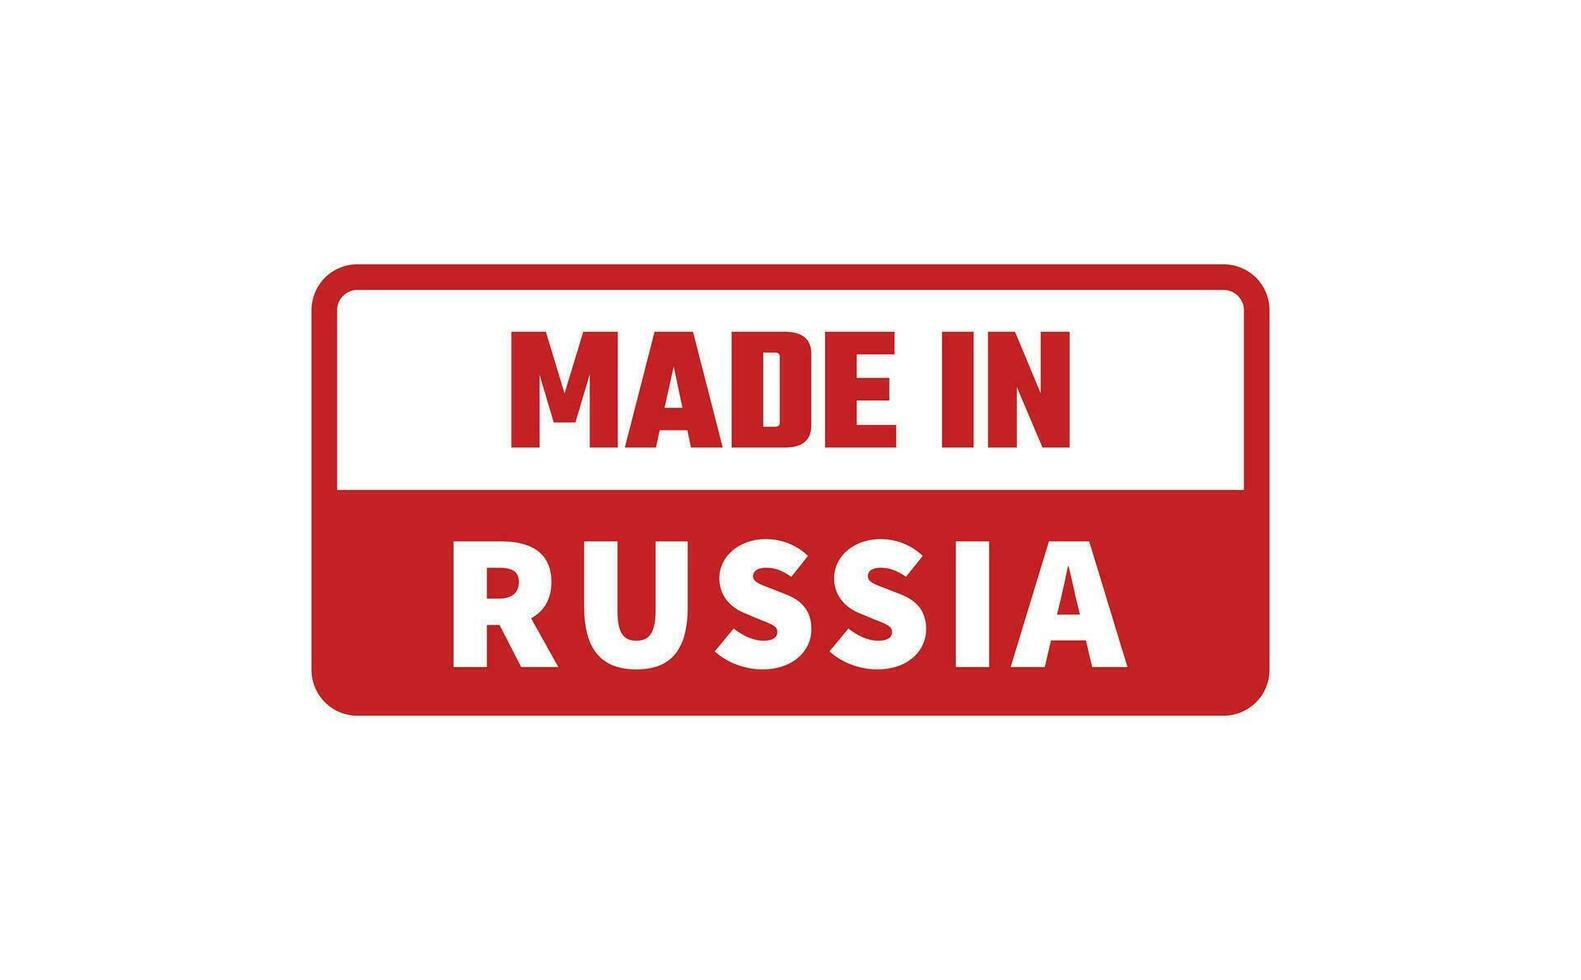 Made In Russia Rubber Stamp vector